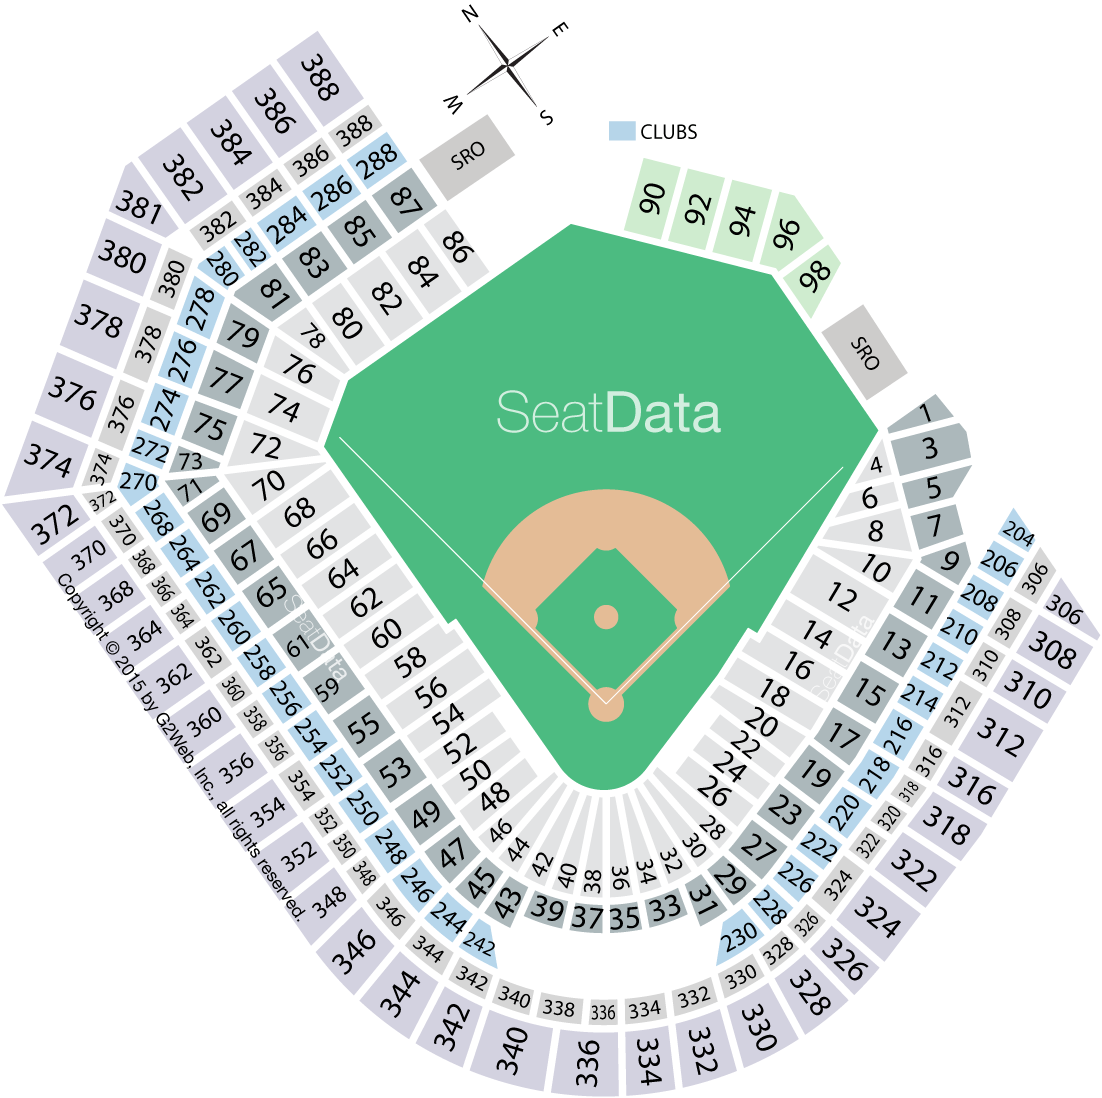 Oriole Park at Camden Yards Seating Map